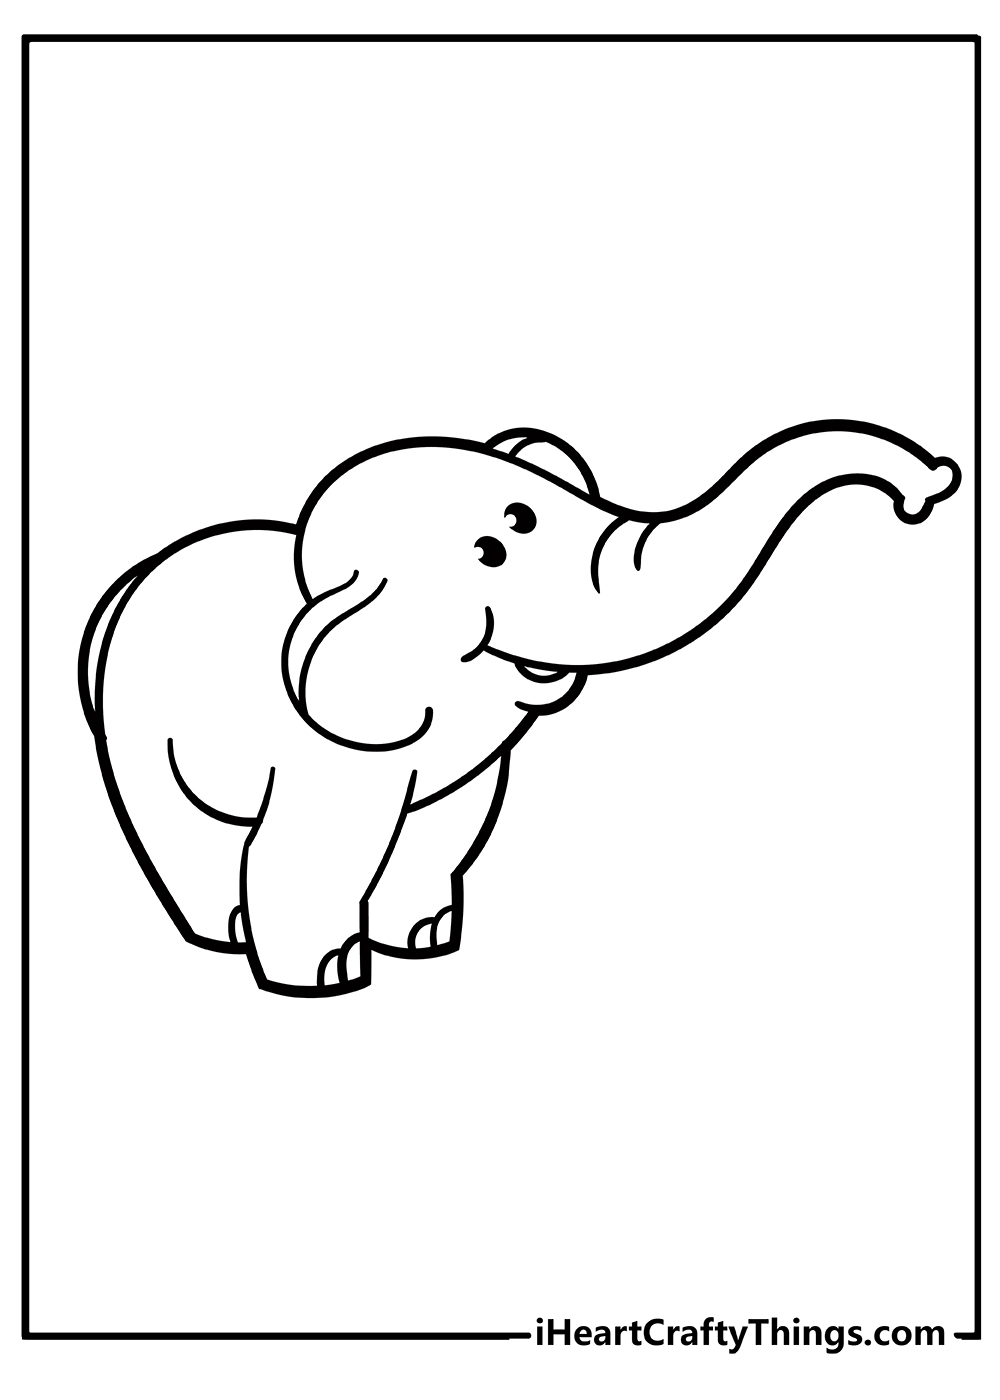 Elephant Coloring Pages for adults free printable